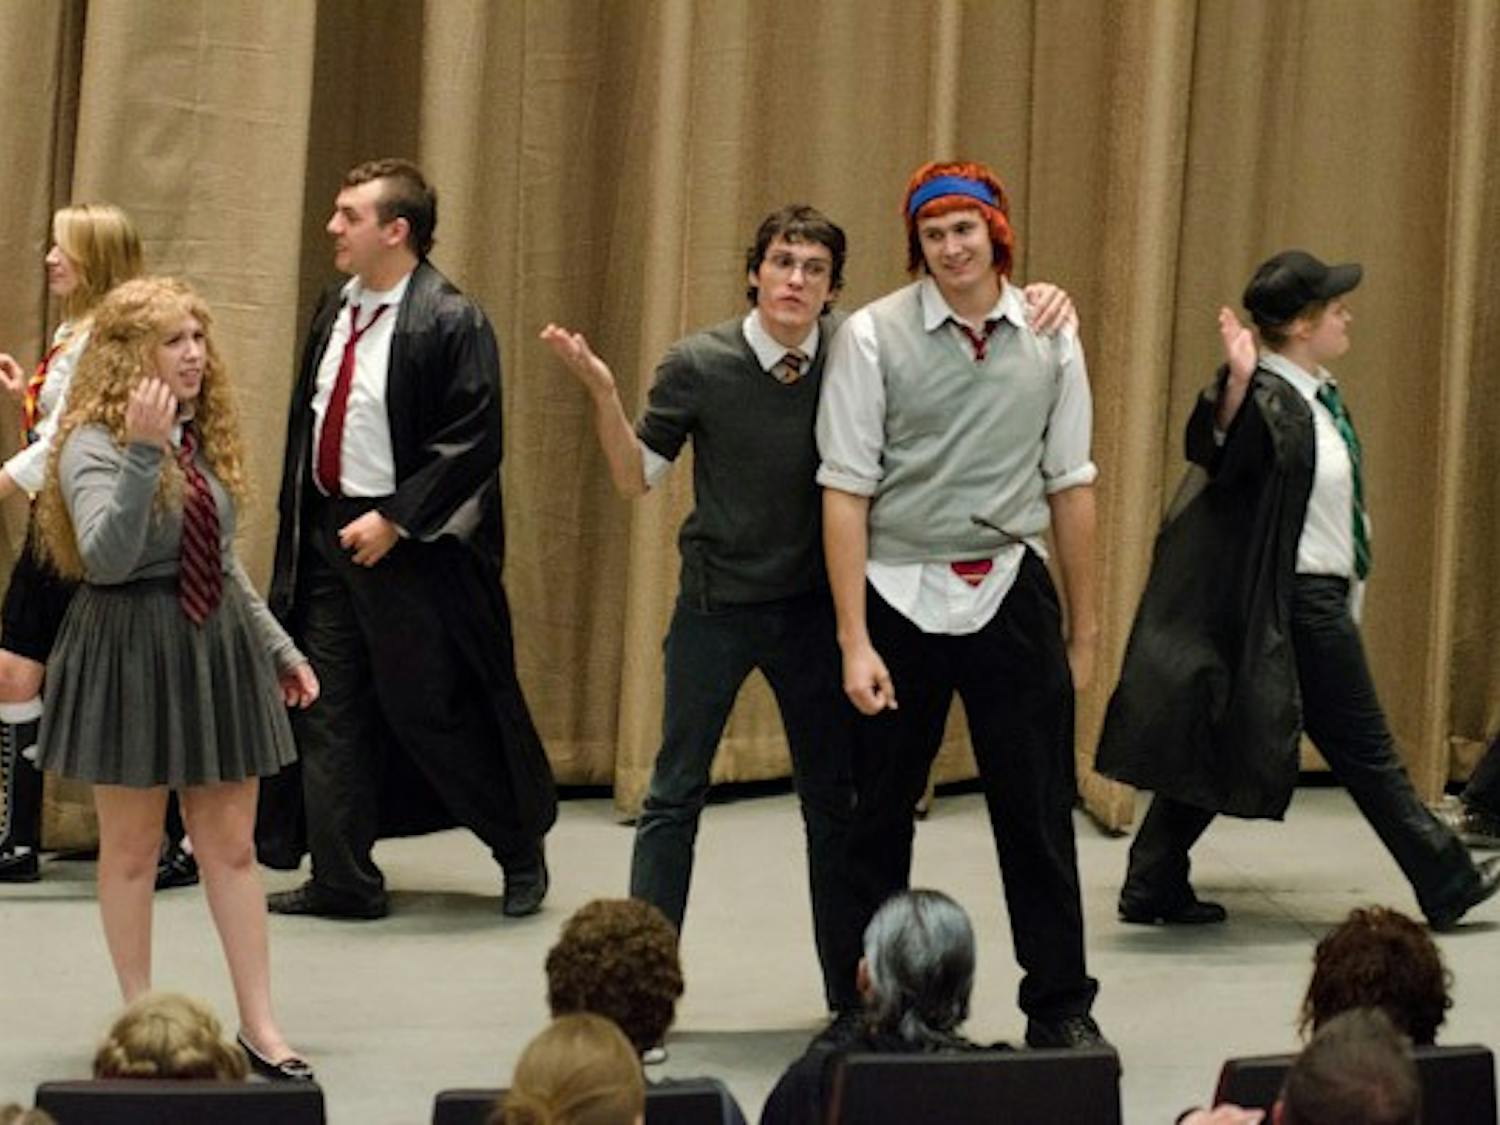 Cunning productions, a group made up of mostly ASU and MCC students, performs a Harry Potter musical show for hundreds of fans as part of the pre-film festivities.